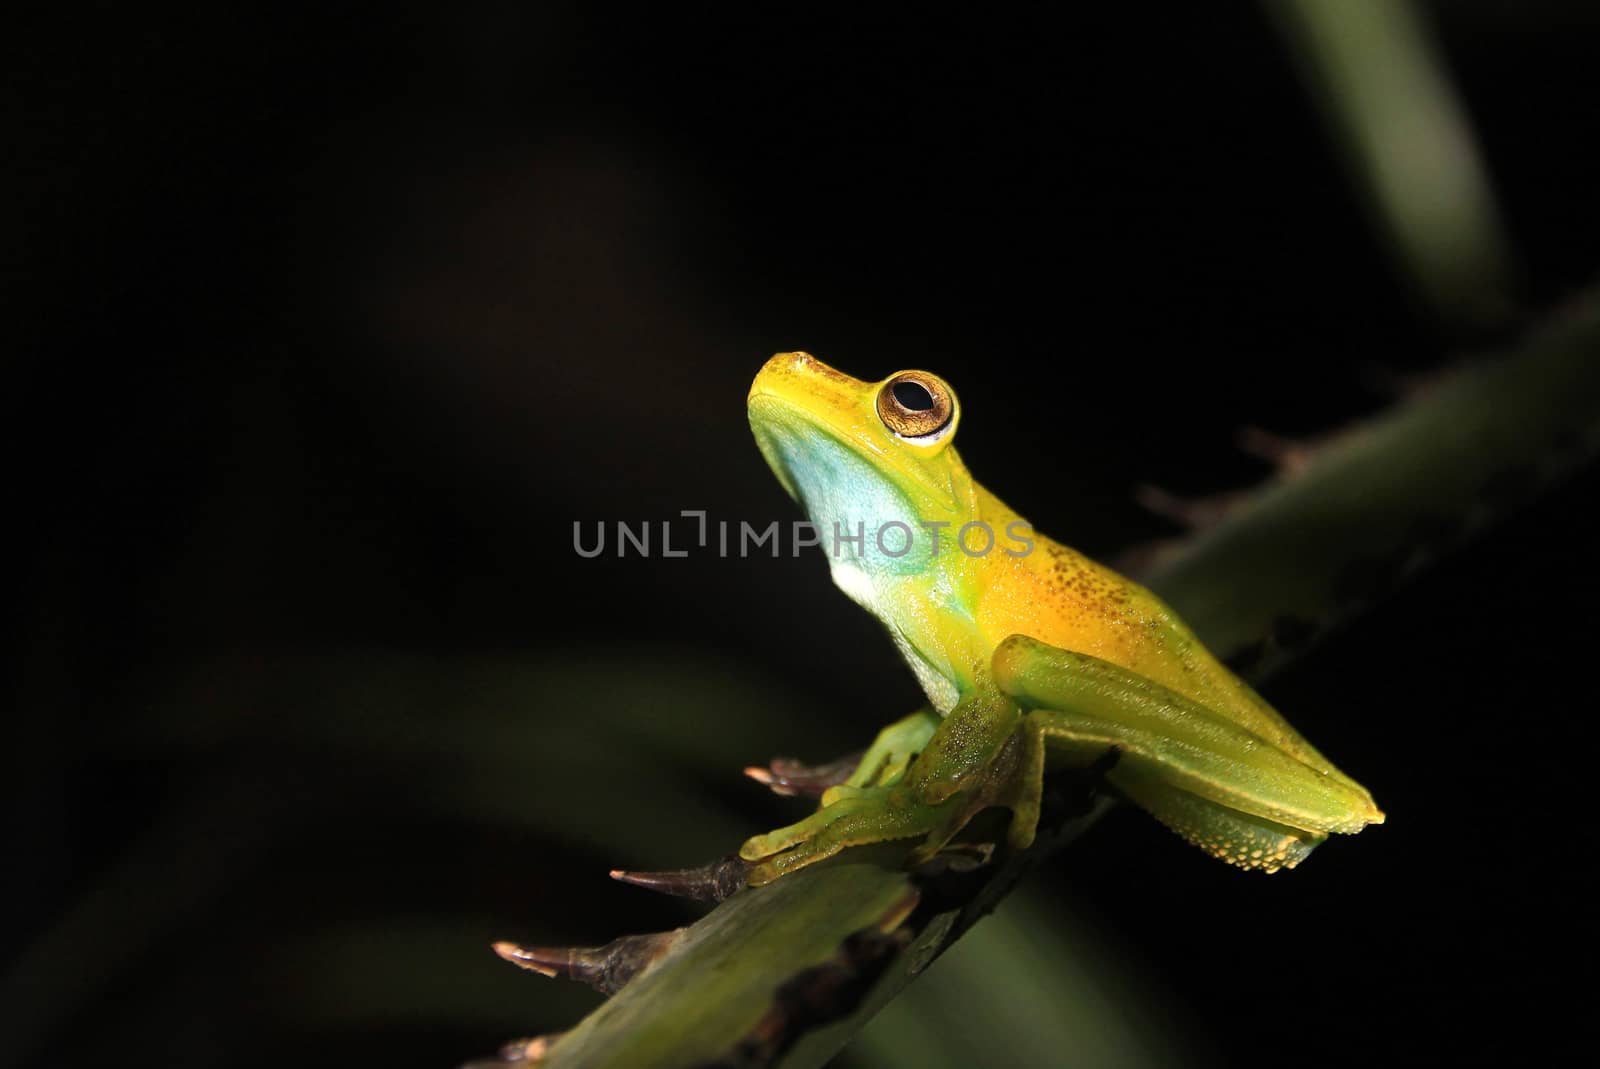 Green and yellow colored palm tree frog sitting on a palm branch in Mindo, Ecuador